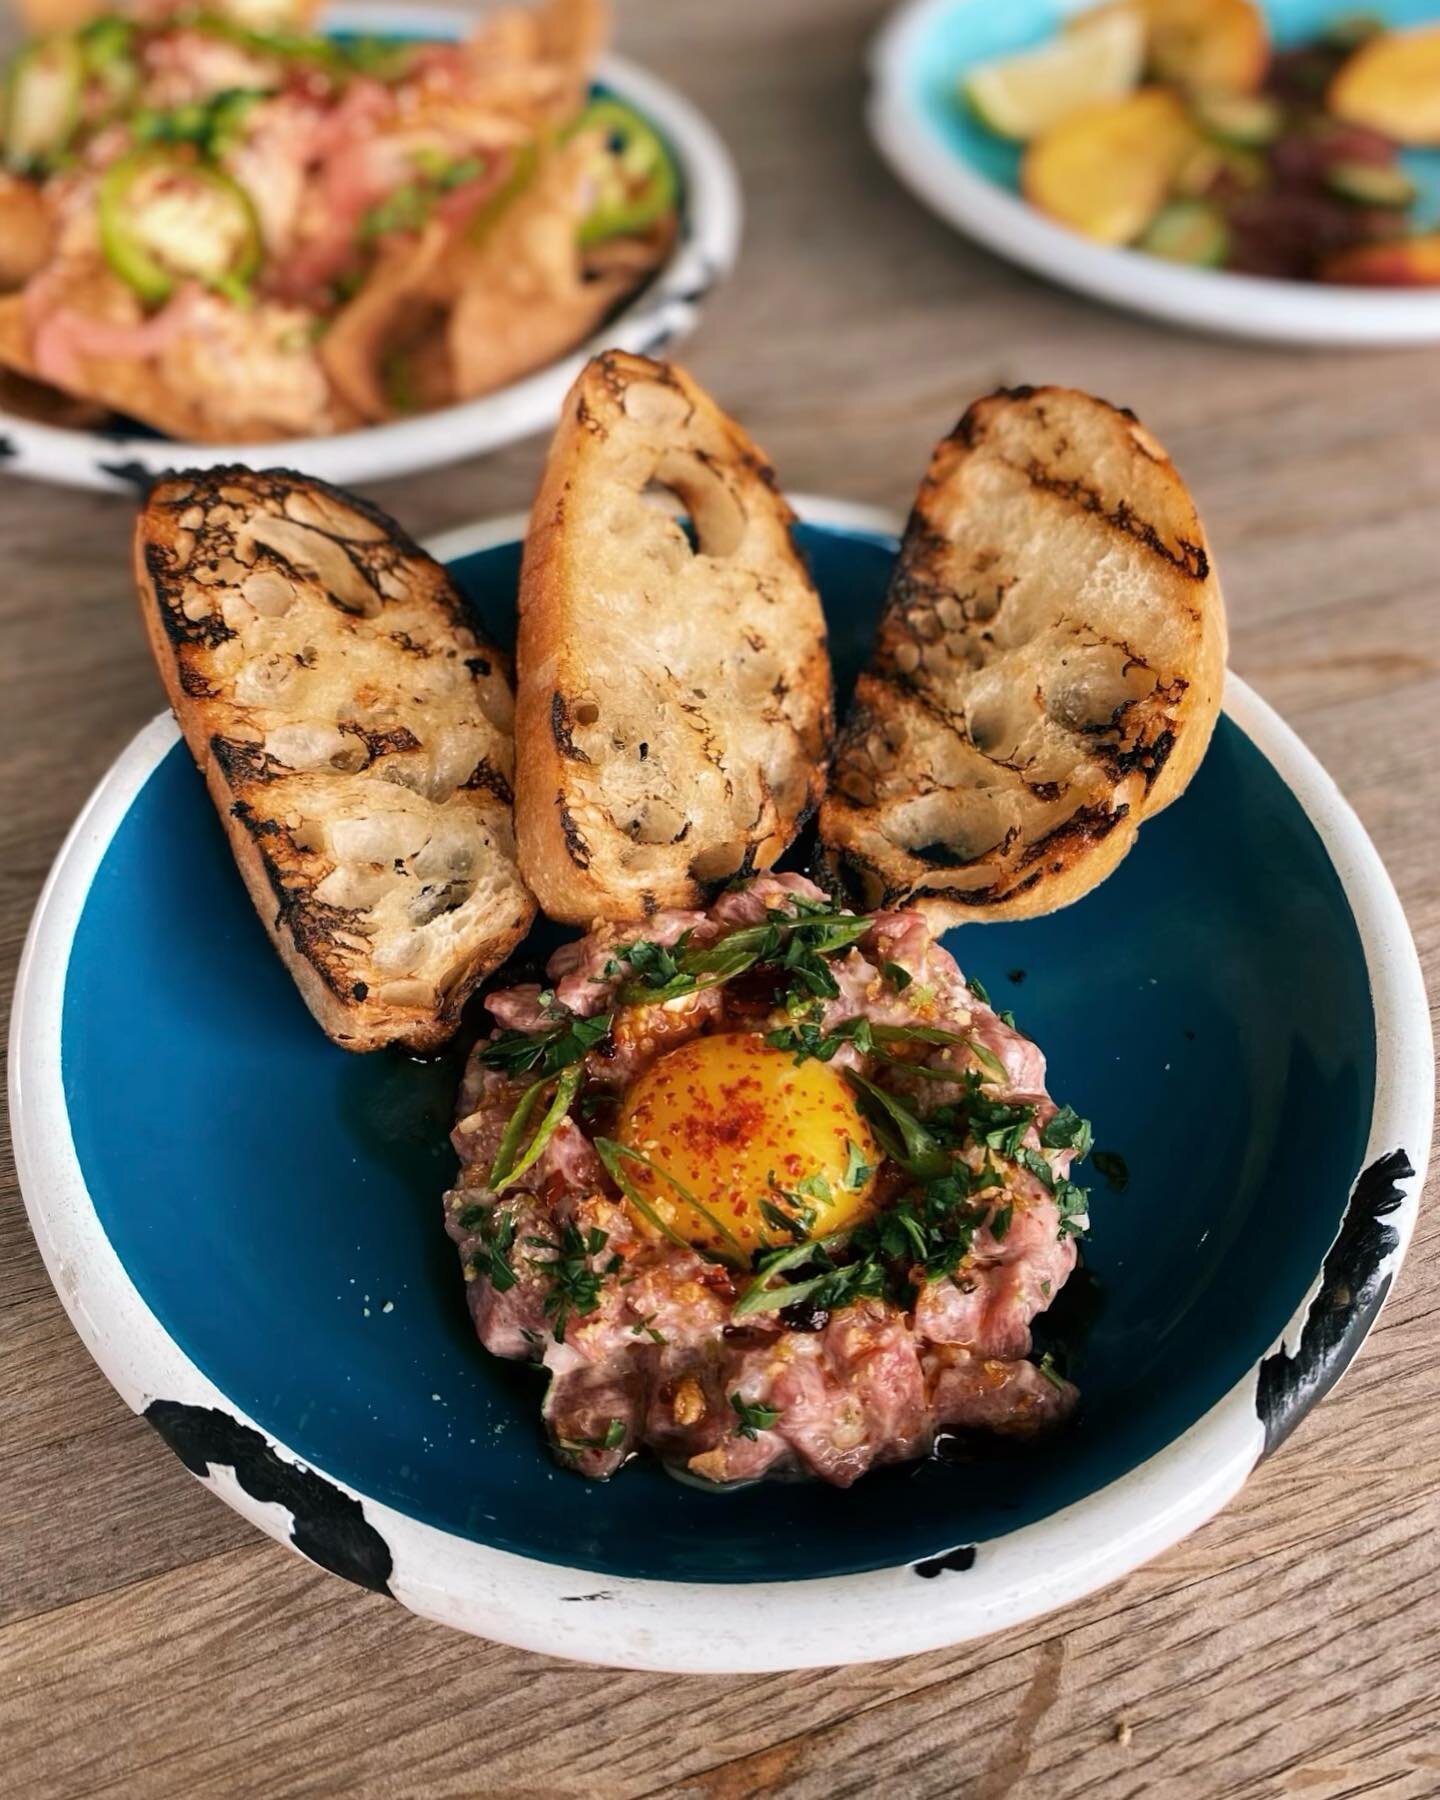 Why sit in 5 o&rsquo;clock traffic when you could be sitting with beef tartare and 1/2 off bottles of wine?! Wednesday Night Raw starts NOW, and happy hour ends at 6pm! #comeandgetit #tasteslikegoodtimes #beeftartare #happyhour #winewednesday